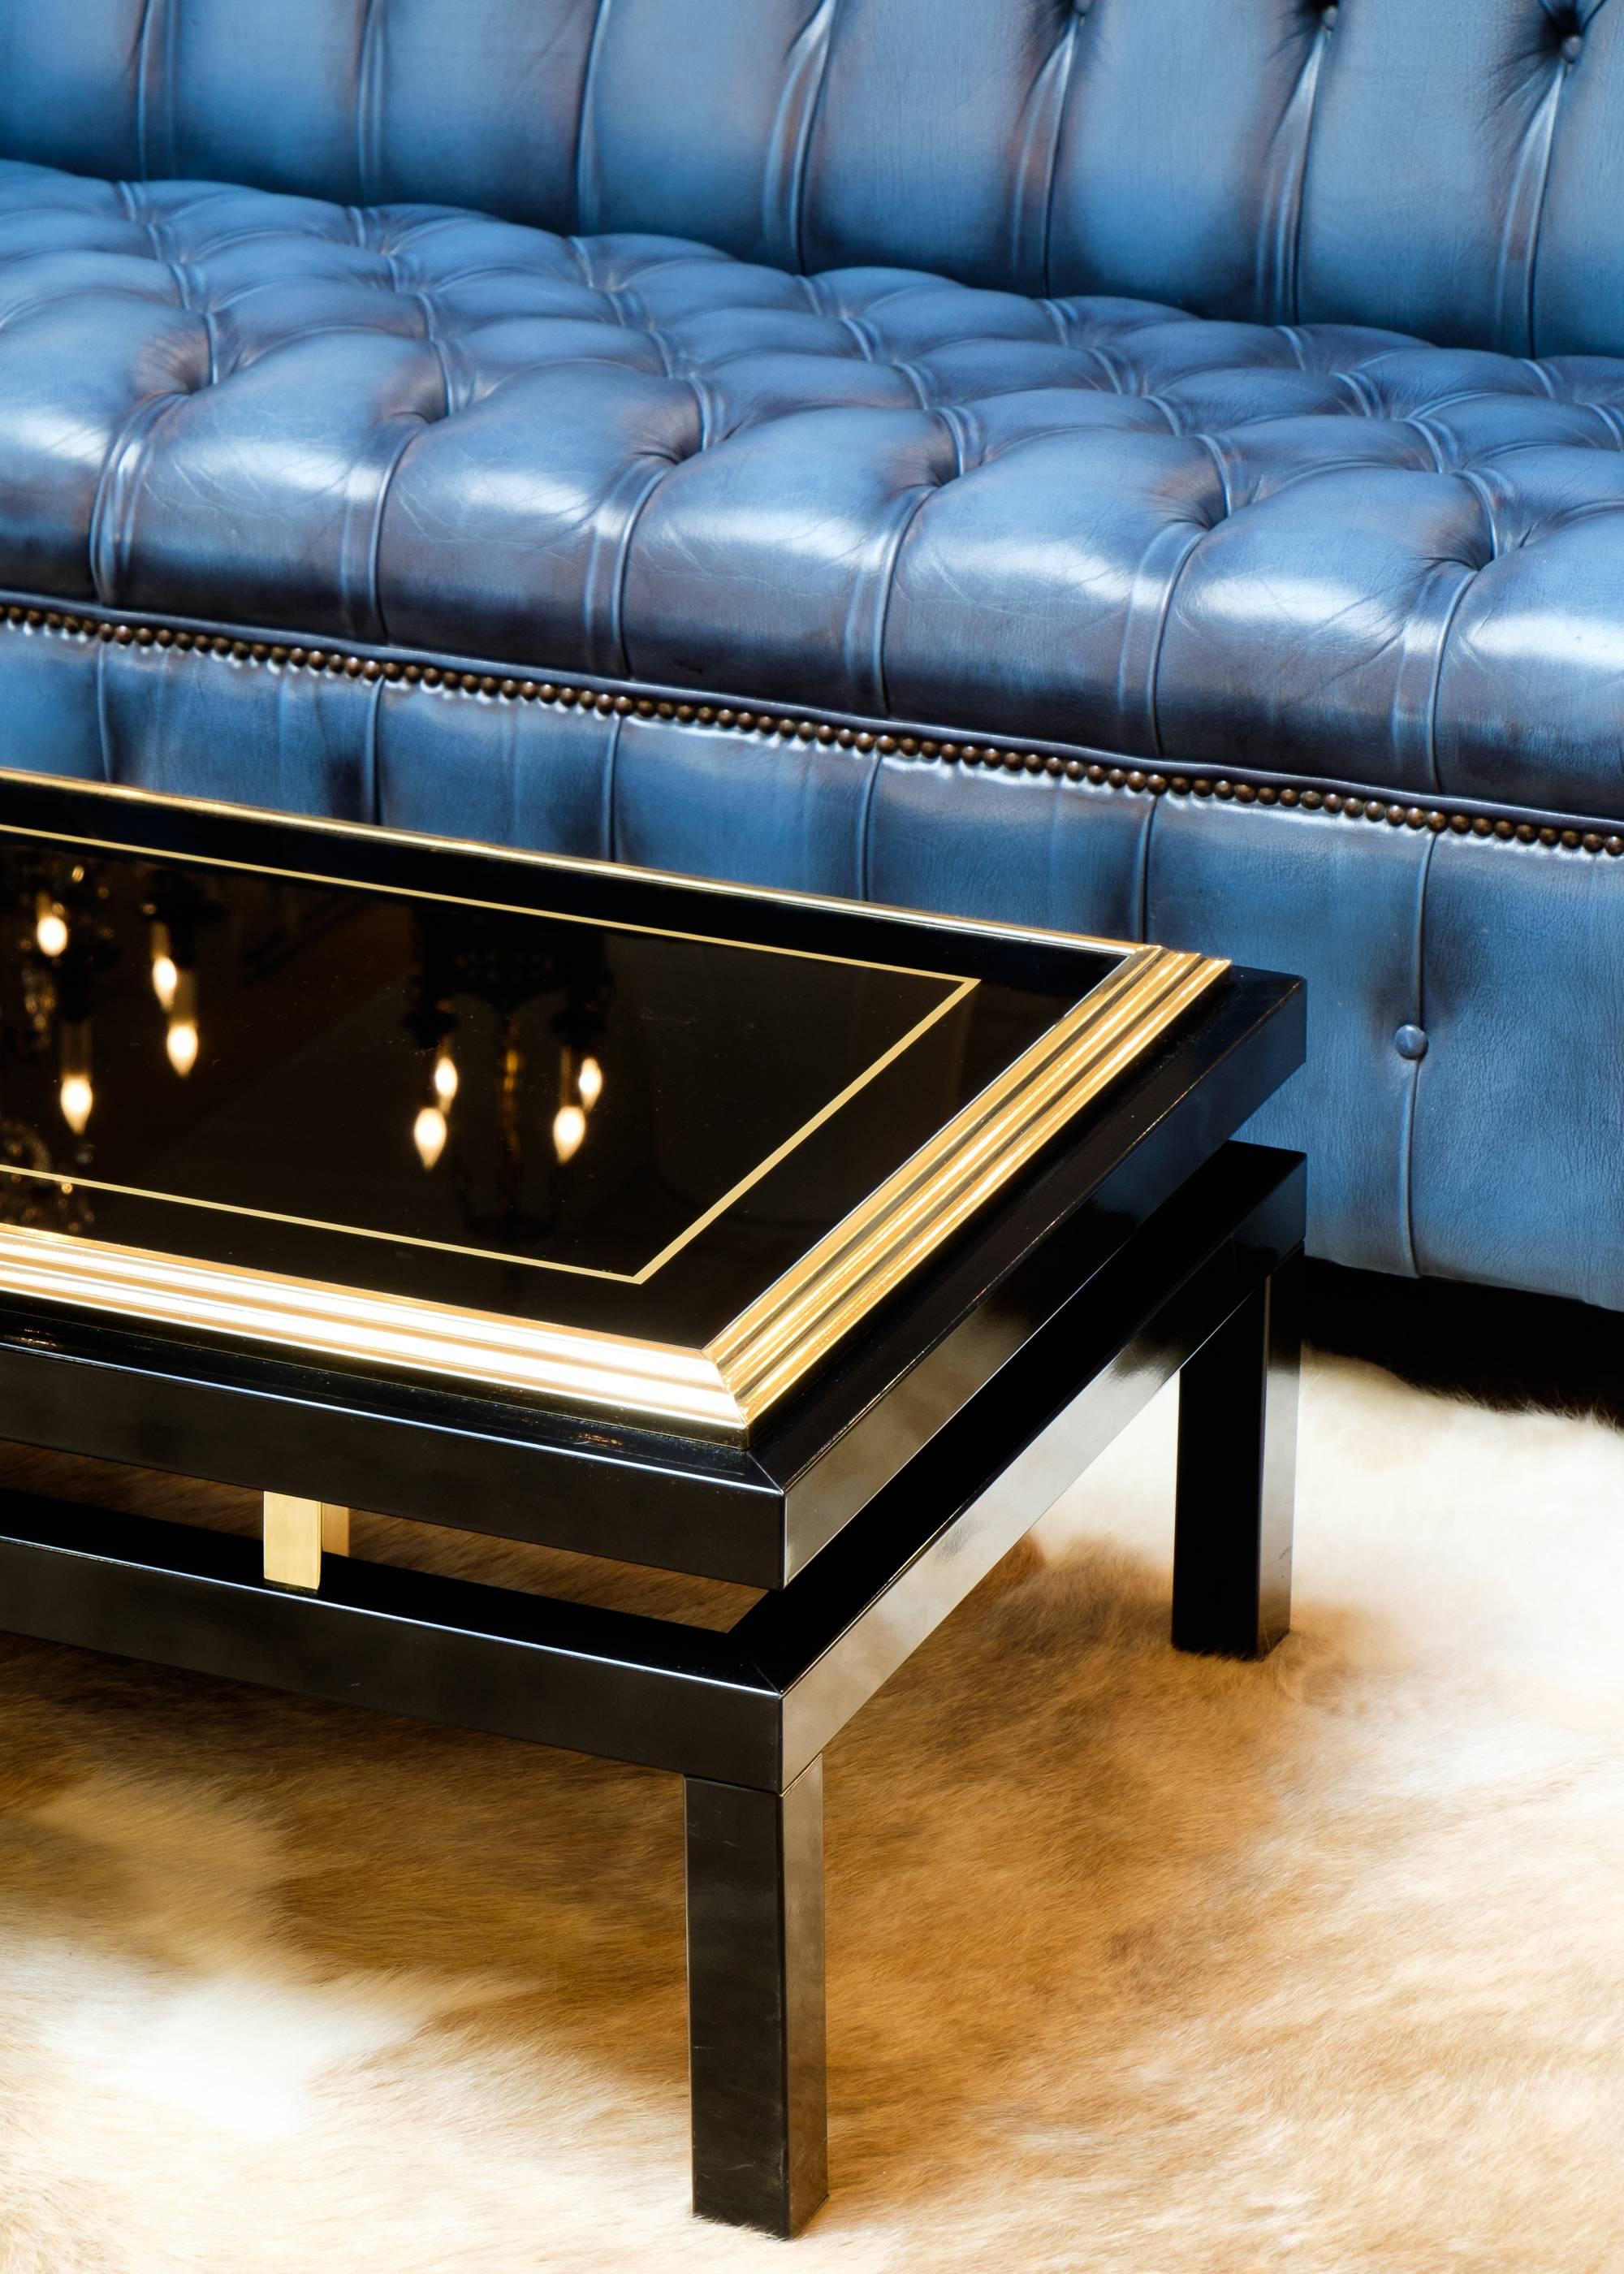 Vintage French coffee table in black metal with brass accents and a black opaline glass top with gold accent. We love the floating quality of the top, supported by polished brass blocks.